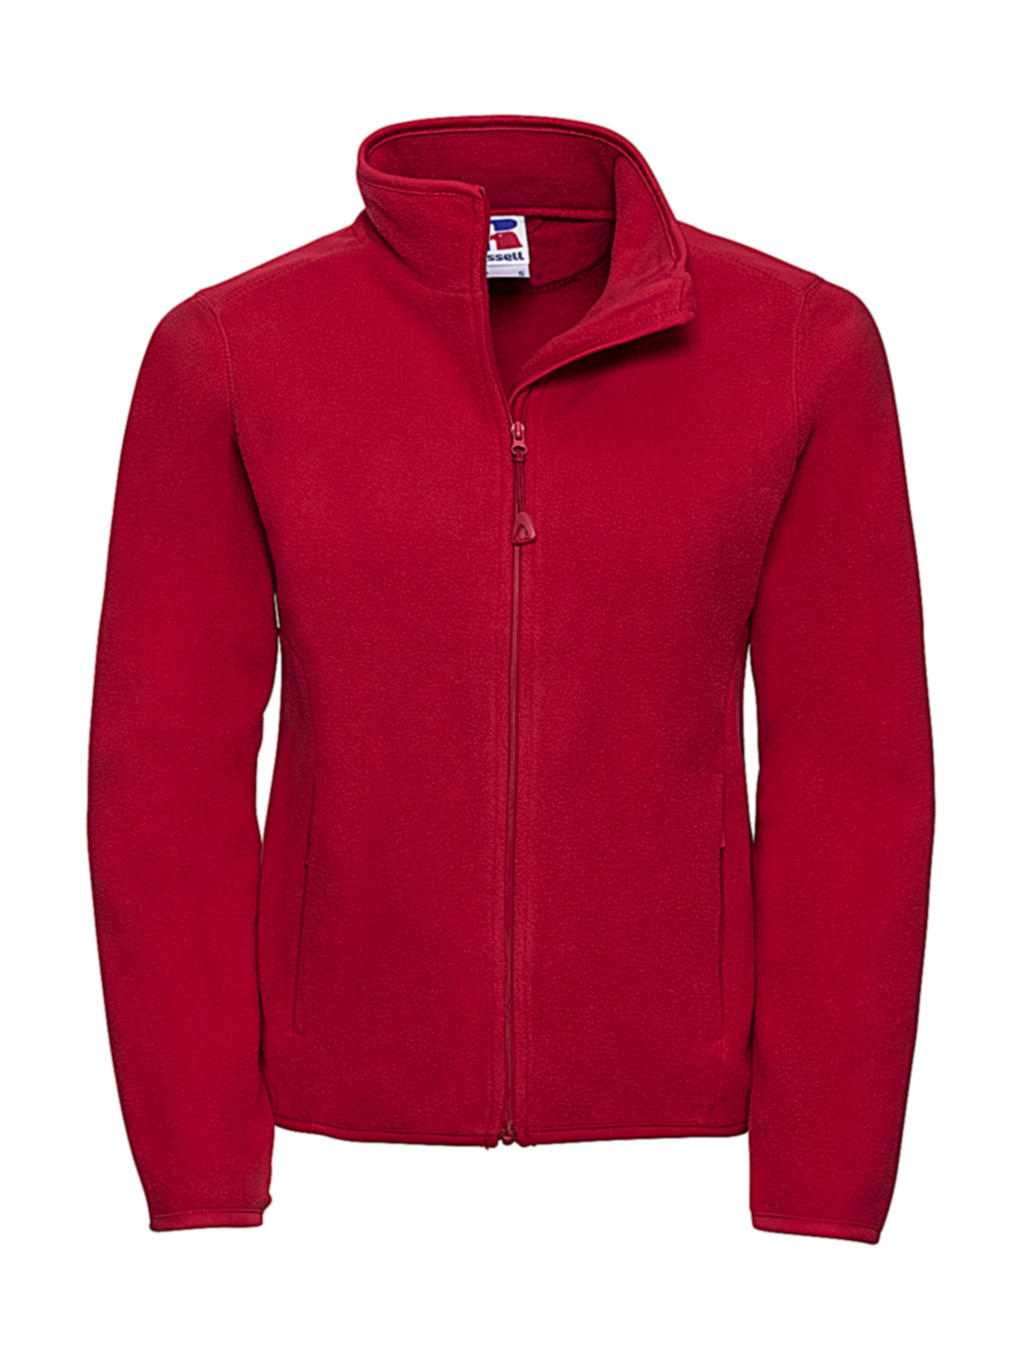  Ladies Fitted Full Zip Microfleece in Farbe Classic Red